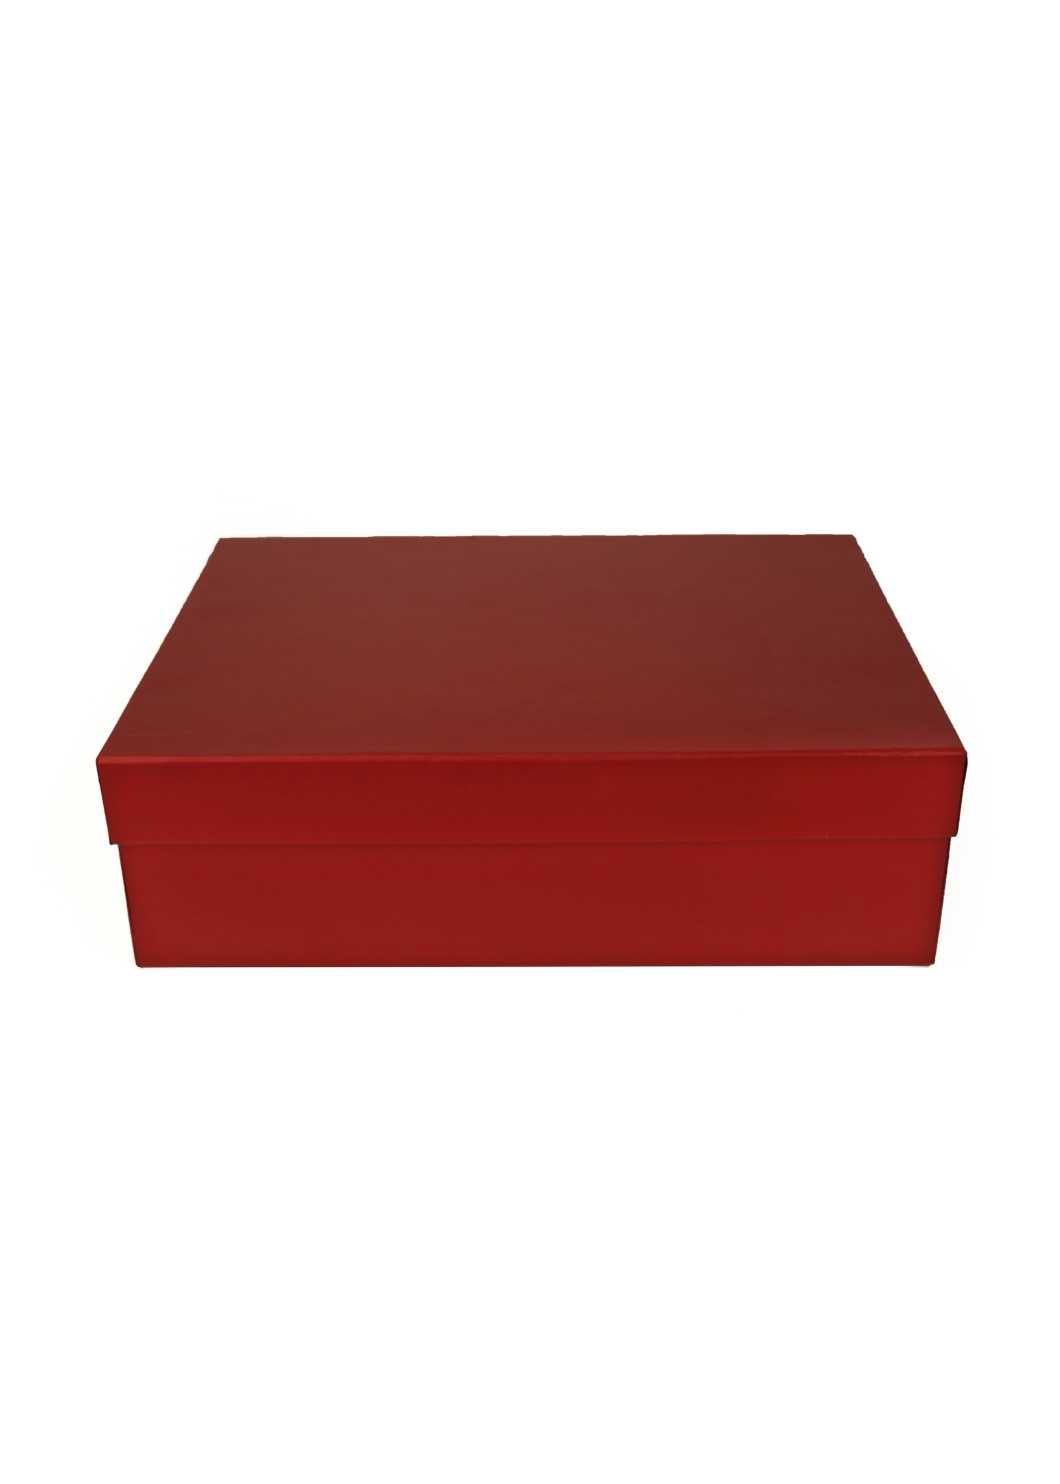 Red Box For Packing